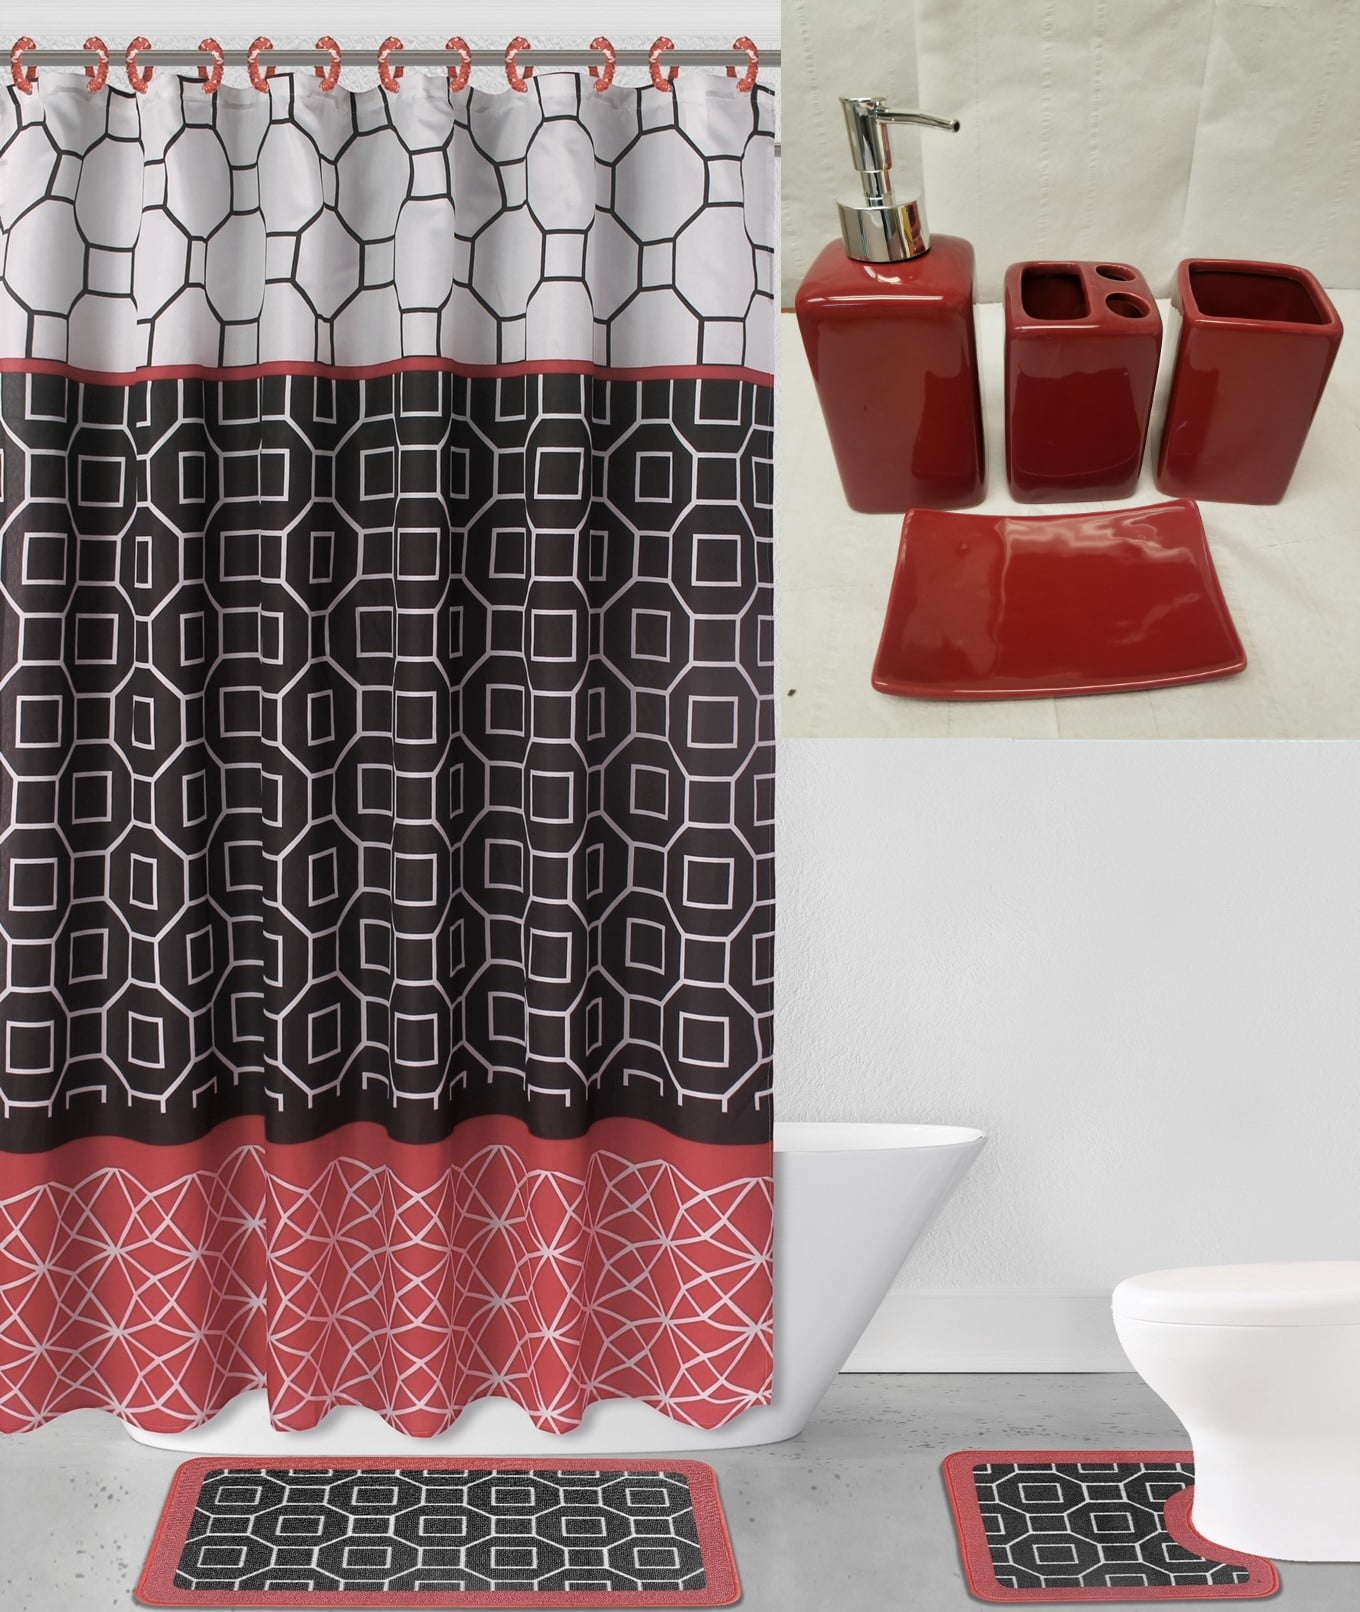 Black Grey Get Naked Shower Curtains with Bath Mats,4 Piece Machine Washable Mildew Proof Toilet Lid Cover,Non-slip Bathroom Mat Absorbent Pedestal Rugs and Waterproof Bathtub Curtain with Hooks 